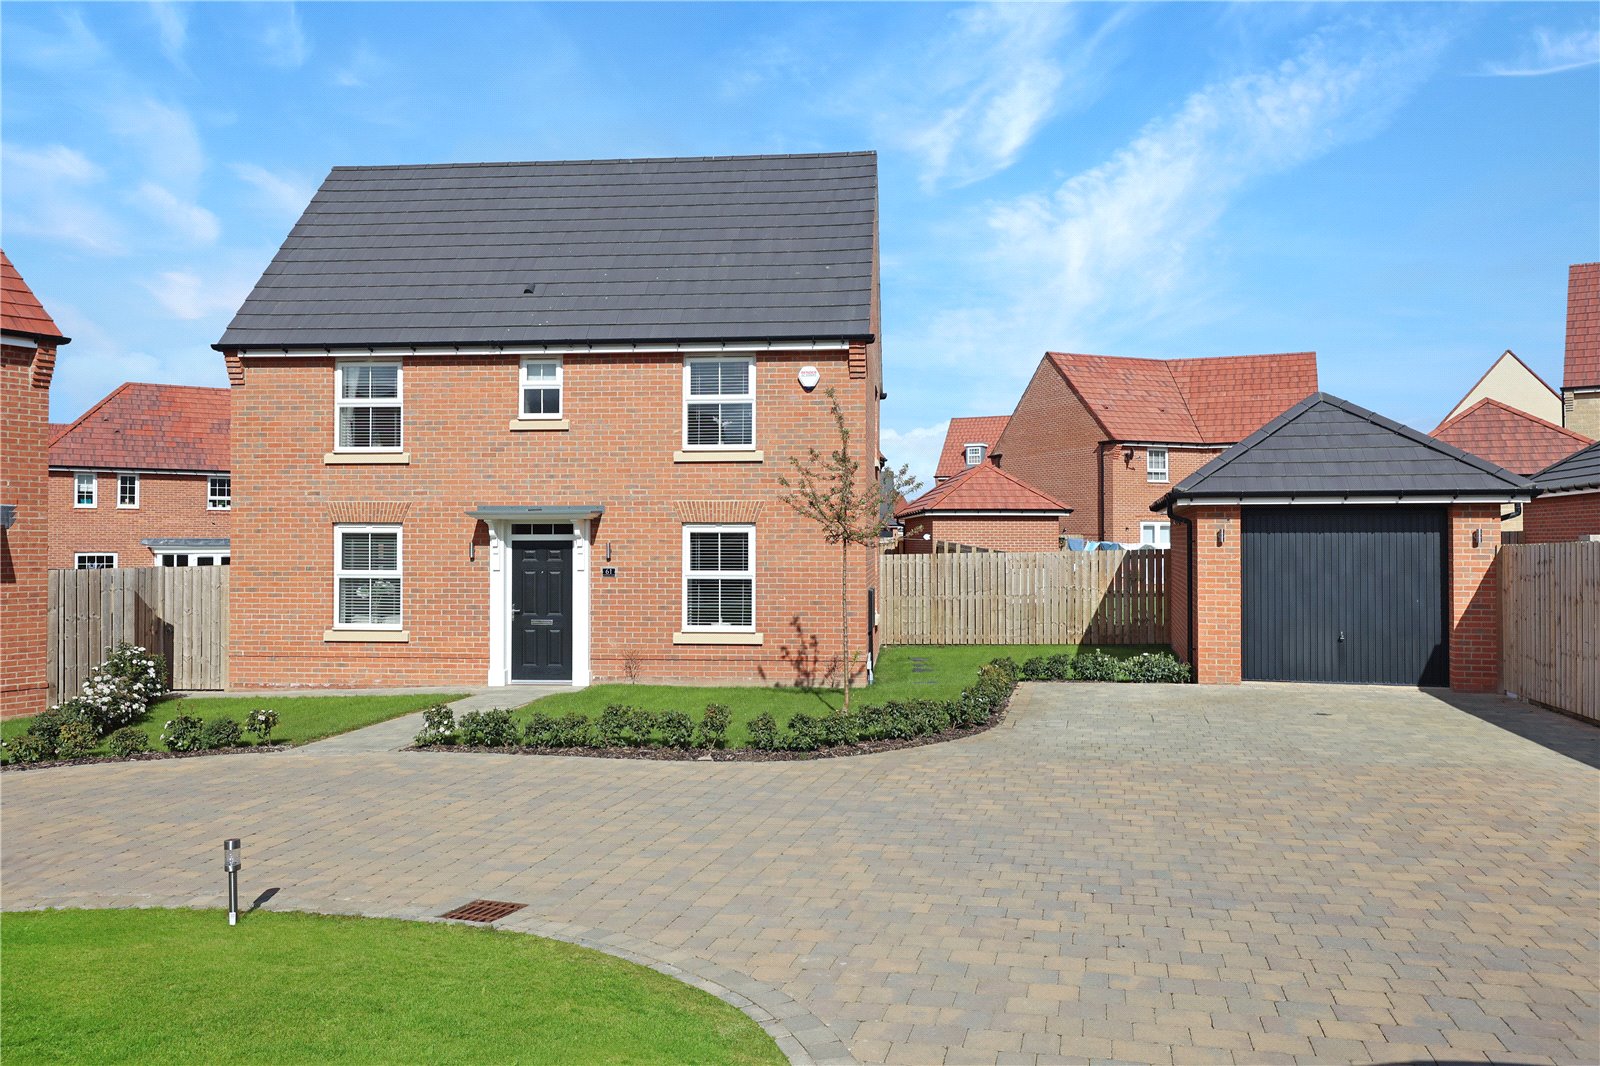 3 bed house for sale in Sinderby Lane, Nunthorpe 1